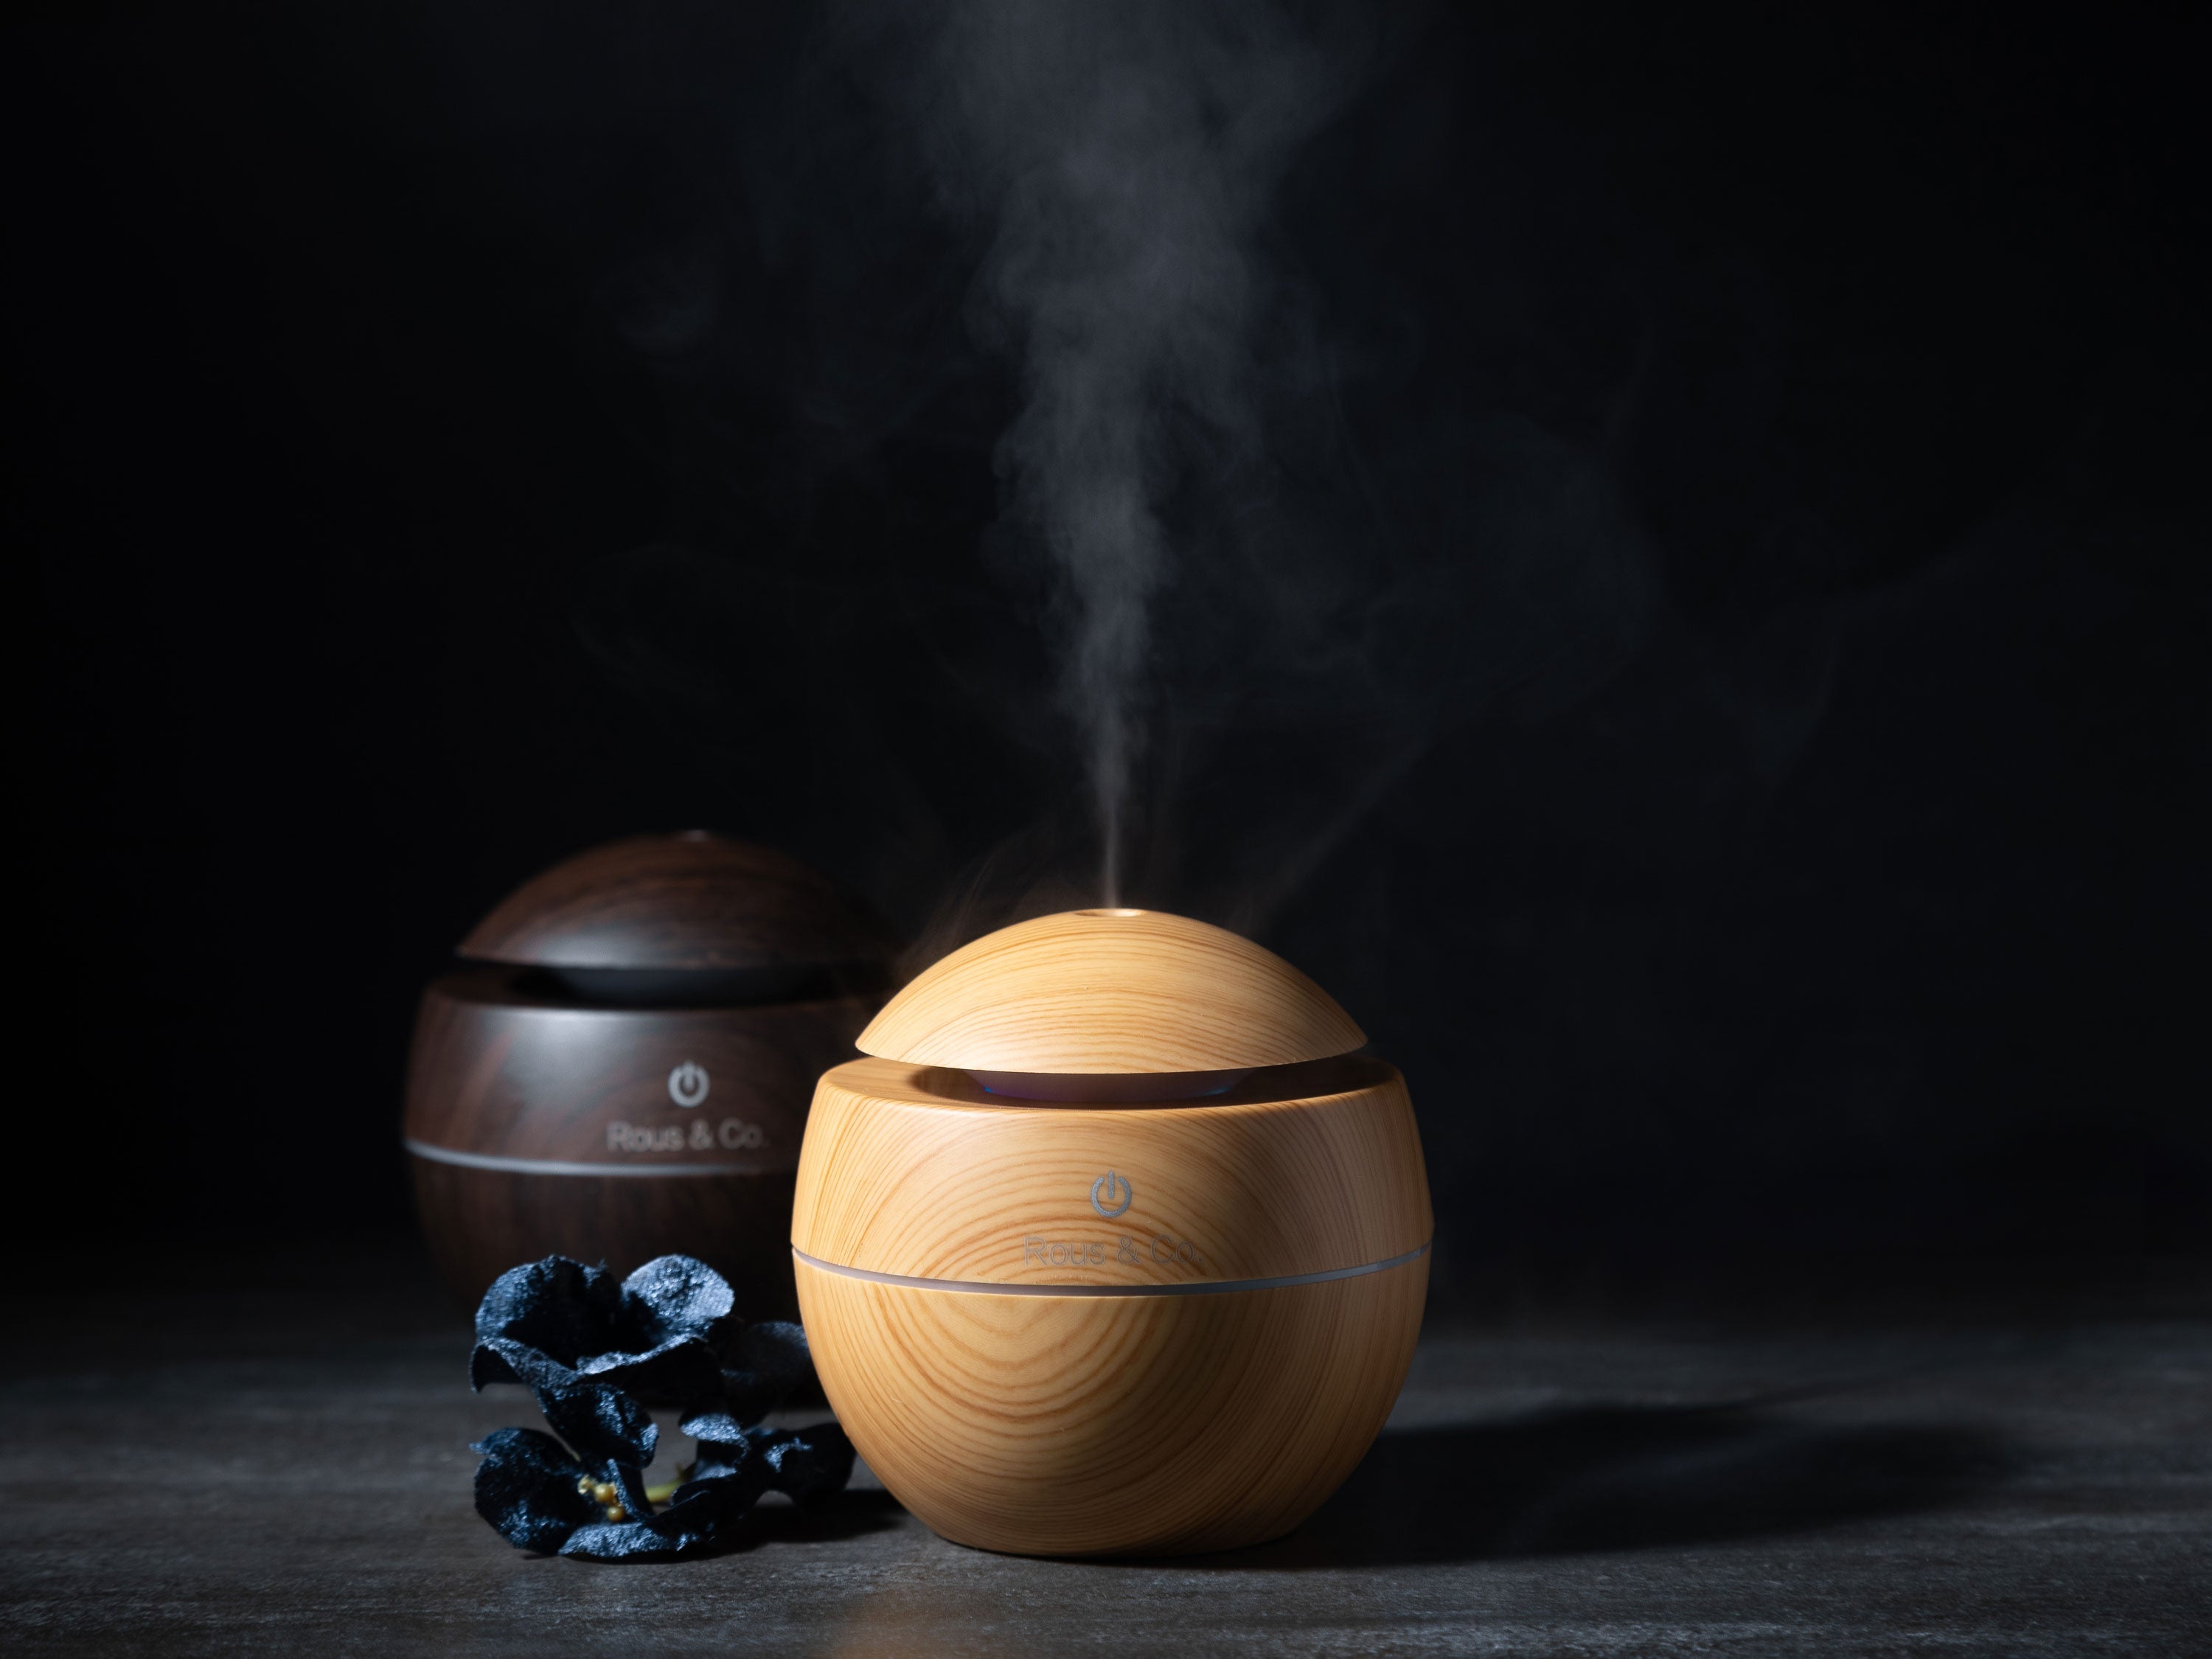 Rous & Co Aroma Device - Essential Oil Diffuser